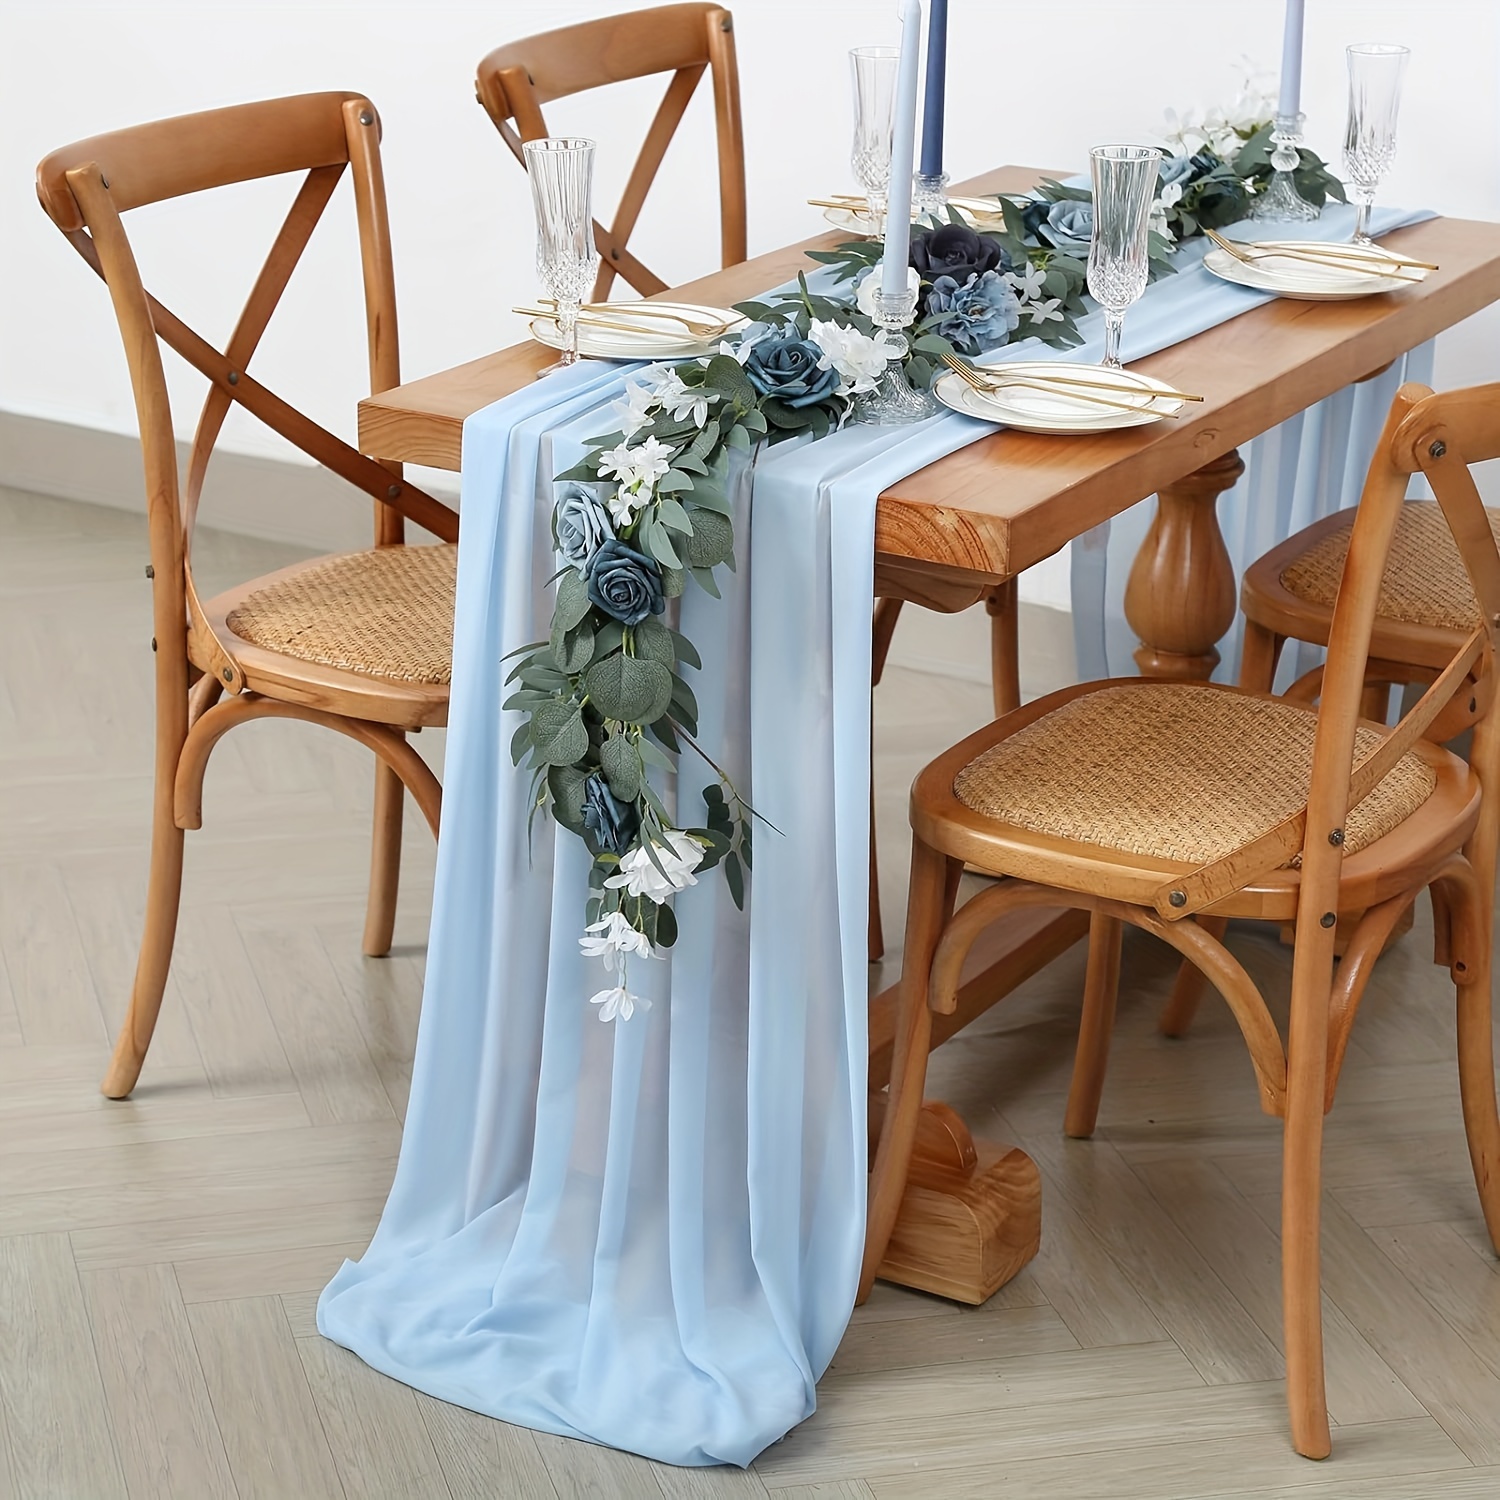 

2-piece Sky Blue Chiffon Table Runner Set, 27x120 Inches - Perfect For Romantic Weddings & Festive Parties